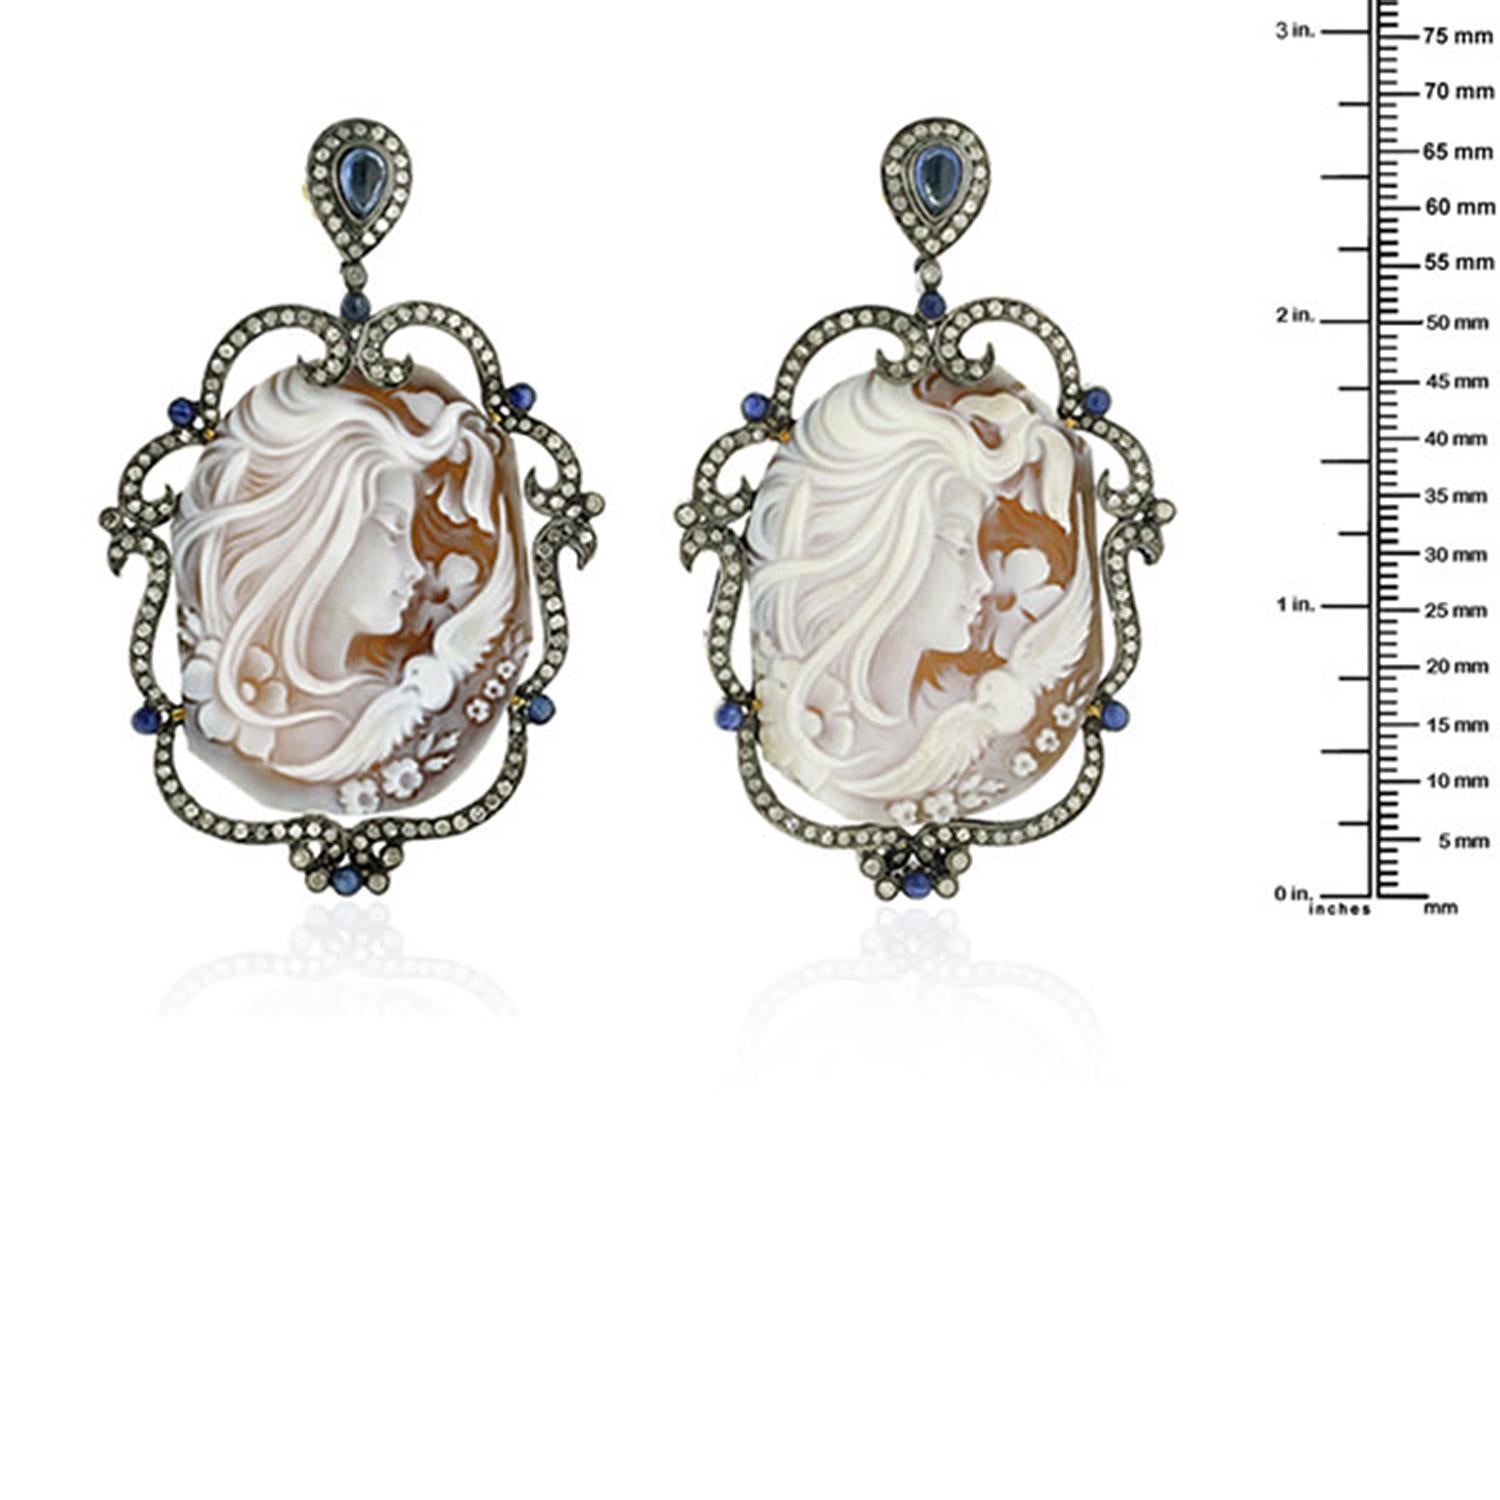 Art Nouveau Carved Cameo Earrings With Blue Sapphire & Diamonds Made In 18k Gold & Silver For Sale